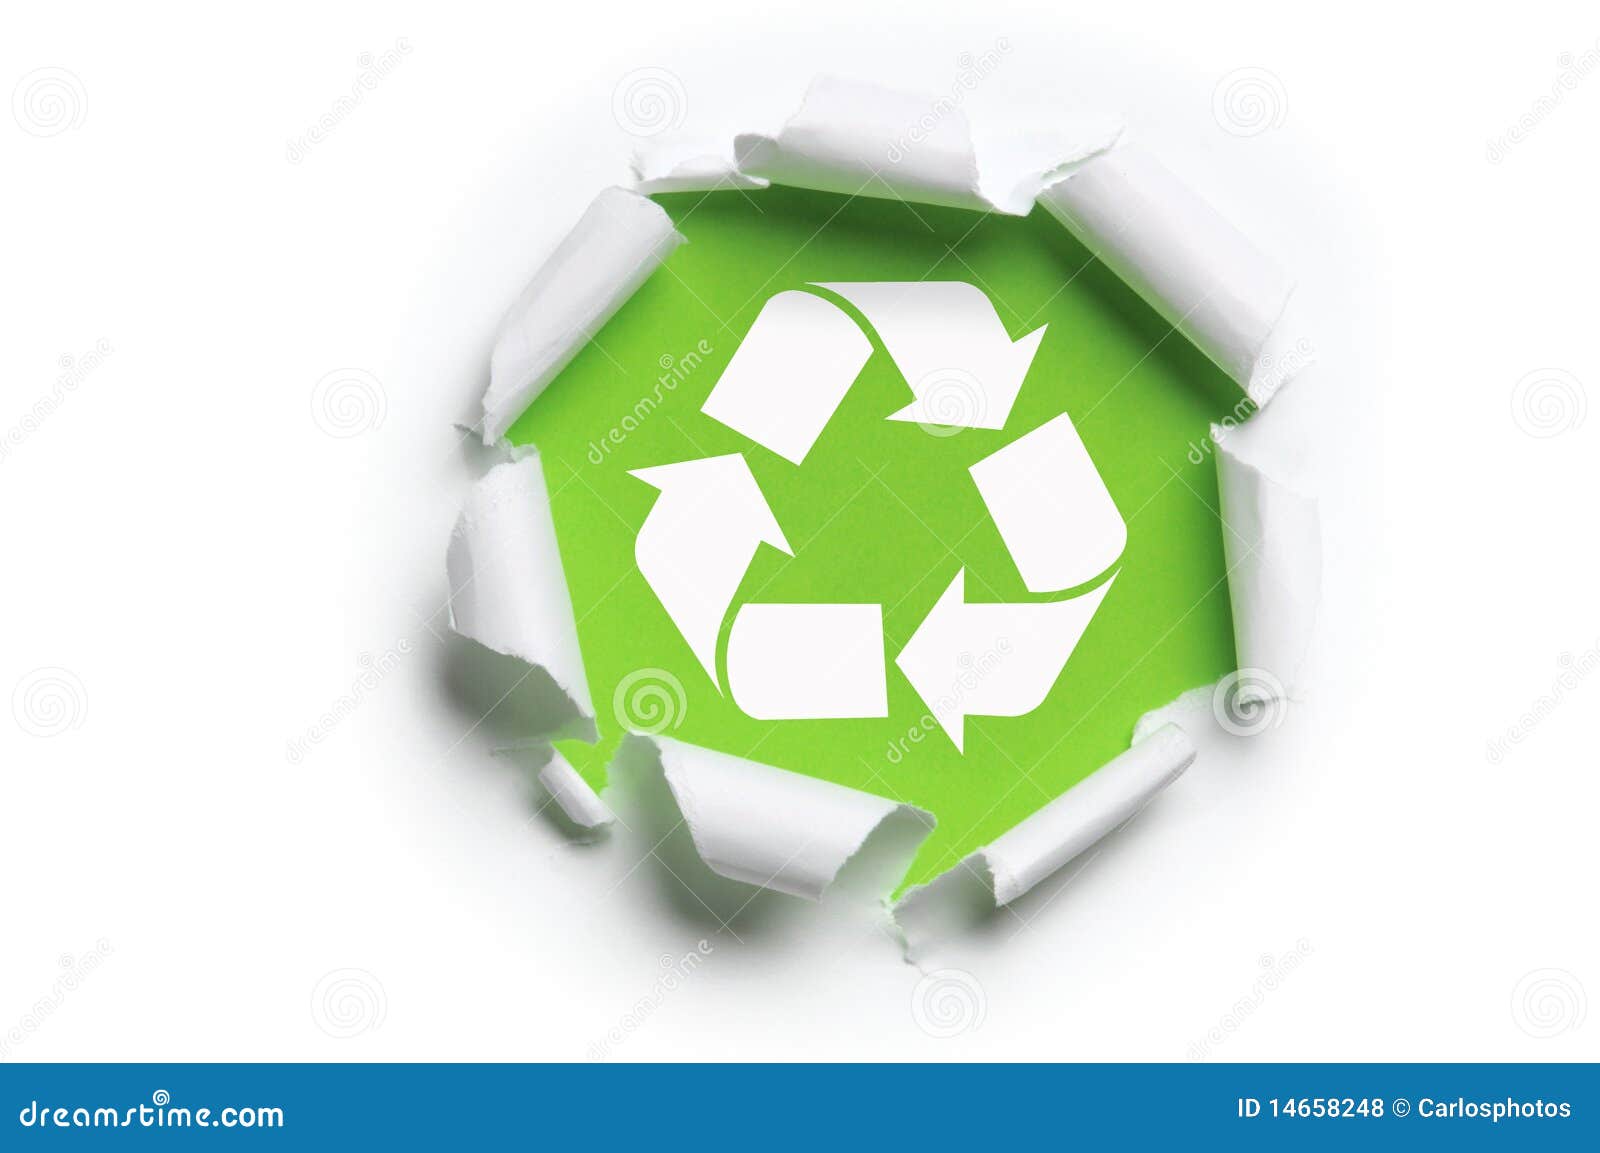 ripped paper with recycle logo